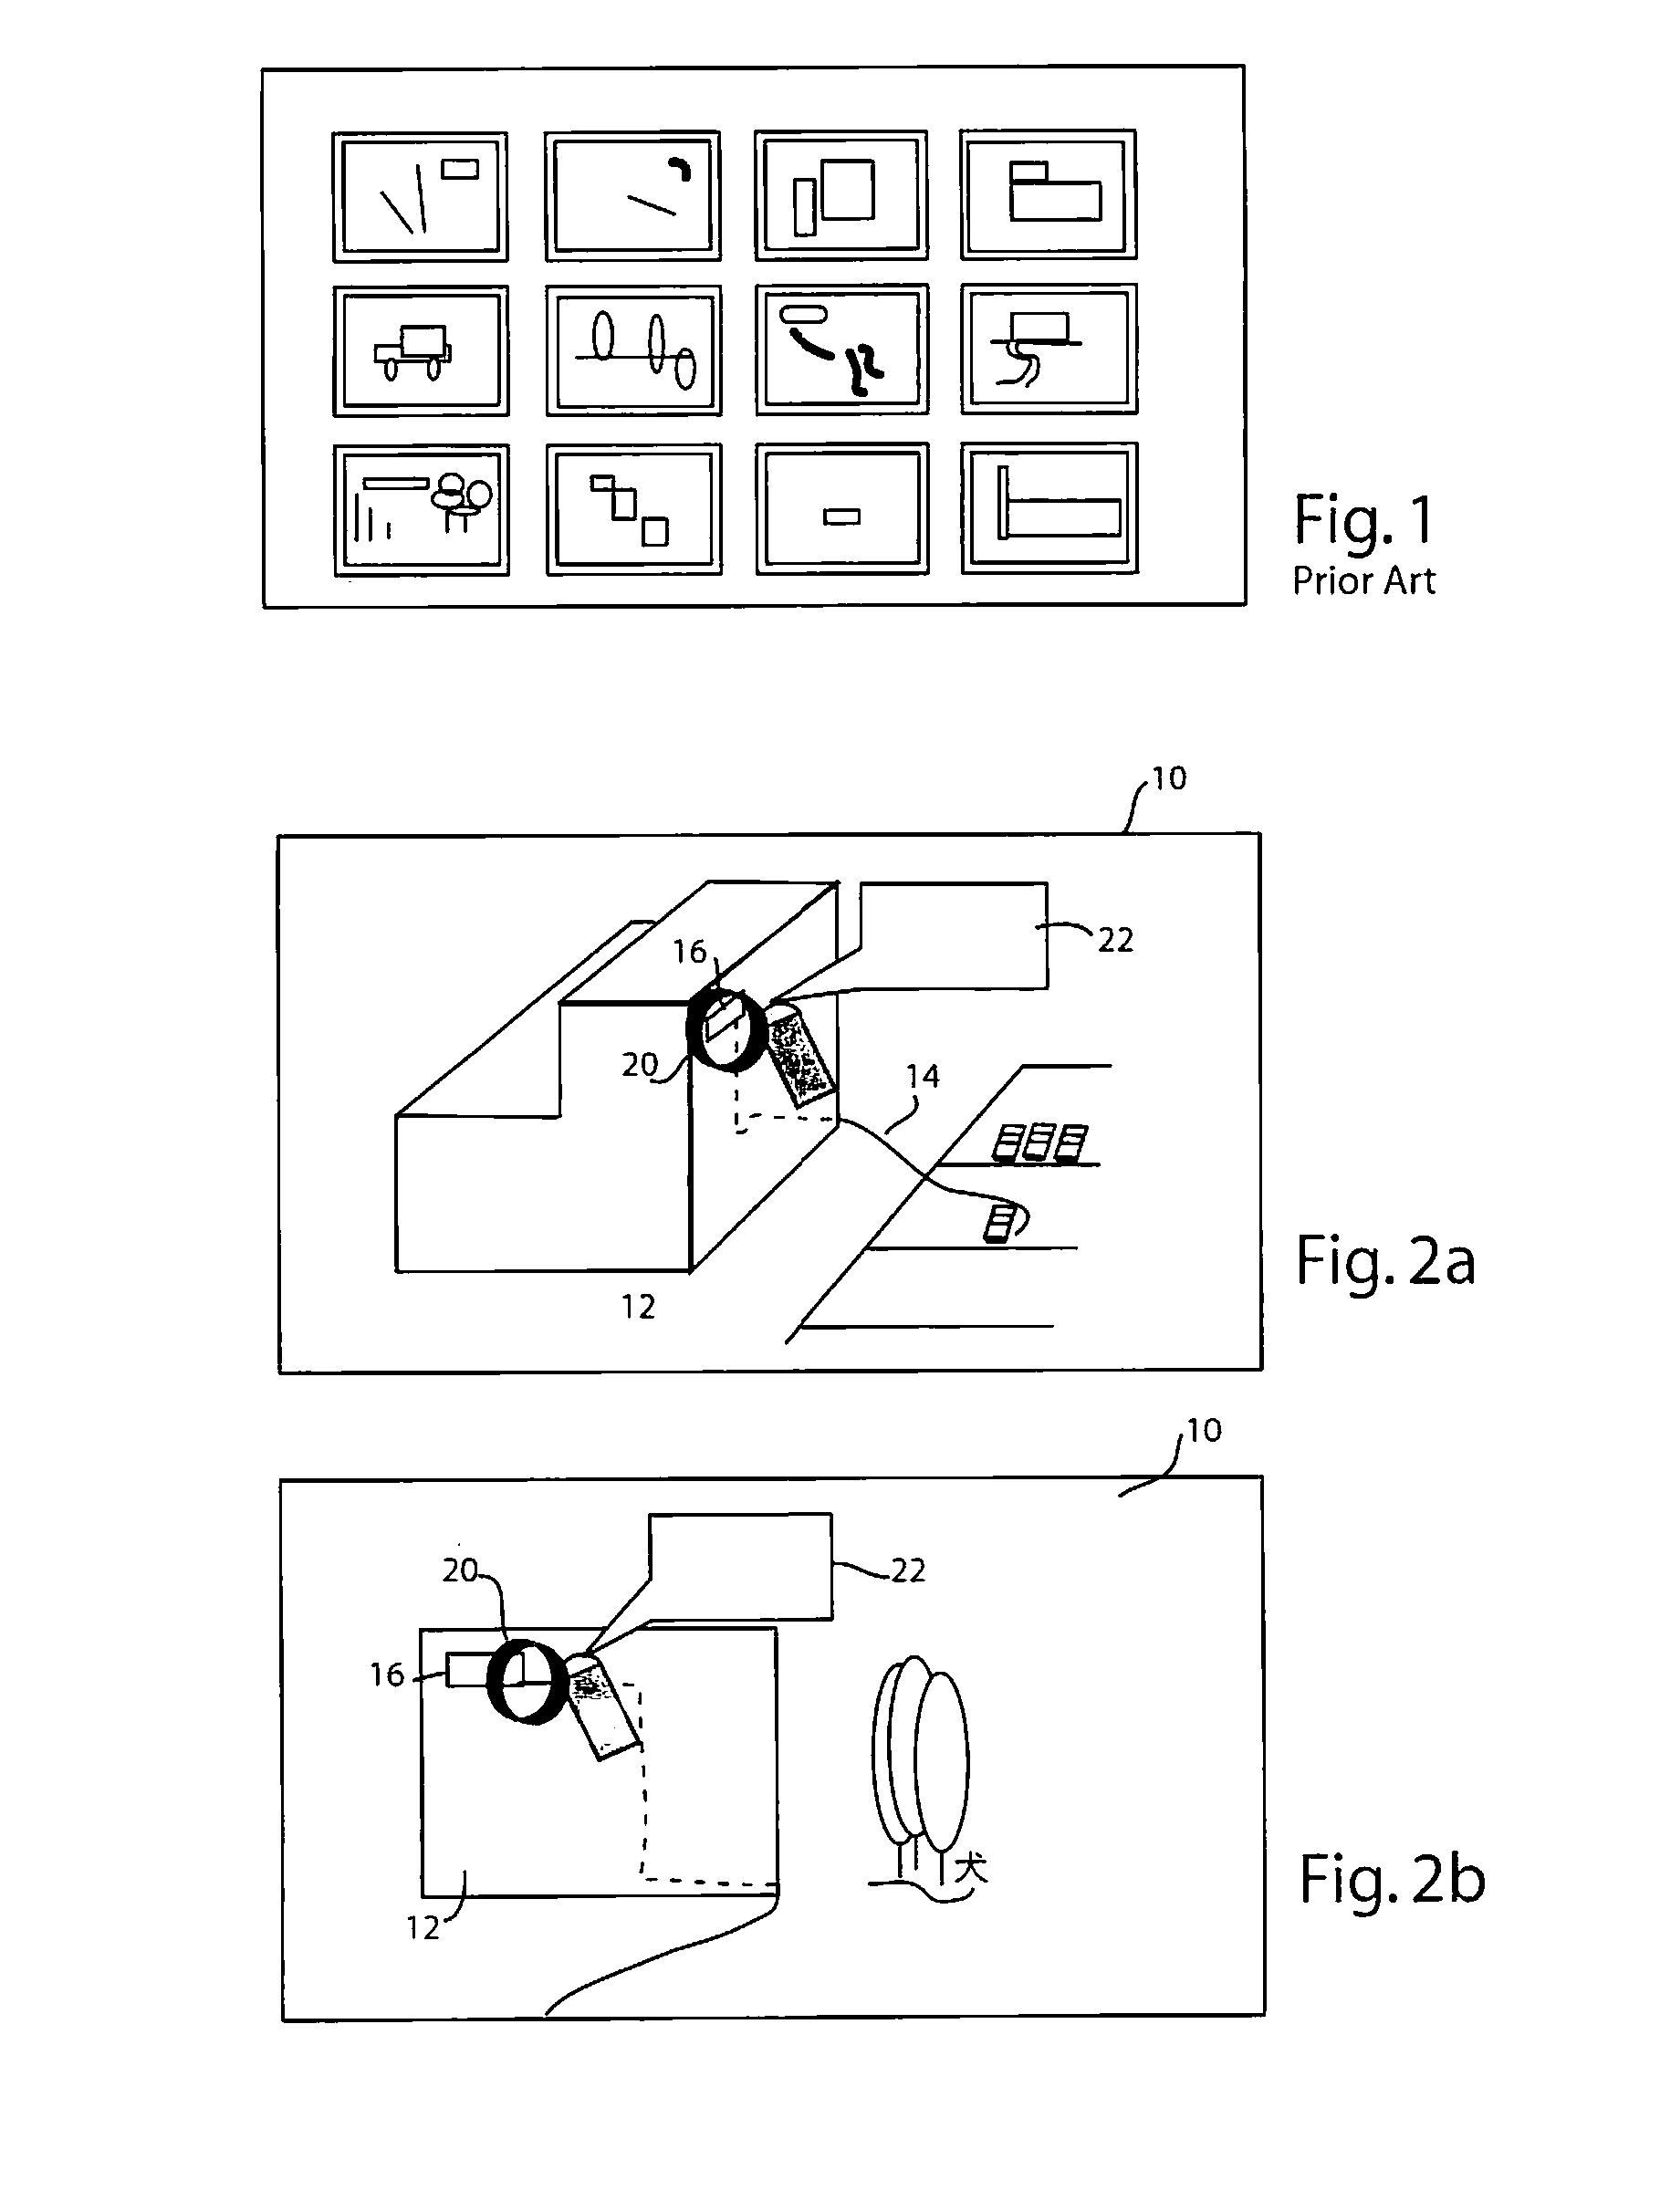 Method and apparatus for efficient and flexible surveillance visualization with context sensitive privacy preserving and power lens data mining